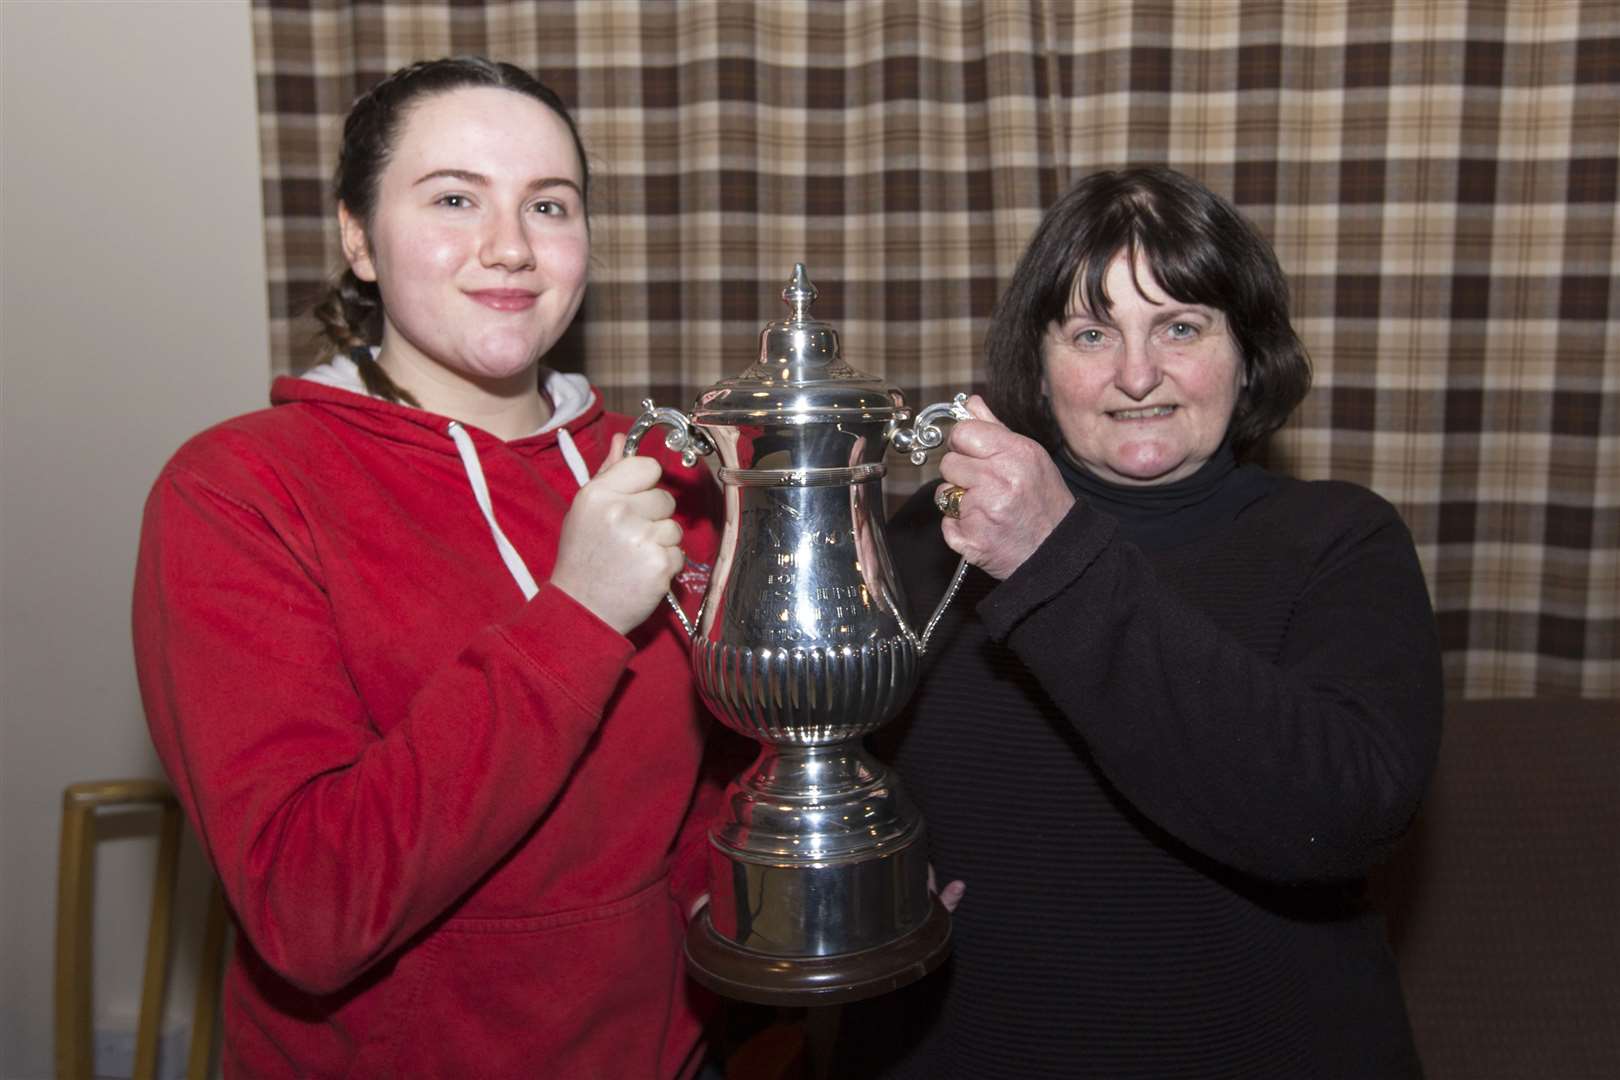 Caitlin Green (left), of Westfield, has continued her domination of the Daisy 2000 junior shooting events by once again winning the indoor trophy, which she first won last year. She is also the holder of the Daisy outdoor trophy which she won in 2018 and again in 2019. The Thurso High School pupil was the first female to have won a Daisy 2000 trophy and has now had four consecutive wins. The indoor shoot at Stirkoke Rifle Club on Thursday night has a record entry of 11 juniors. The trophy was handed over by Caithness Small Bore Rifle Association's secretary, Marty Simpson. Picture: Robert MacDonald / Northern Studios